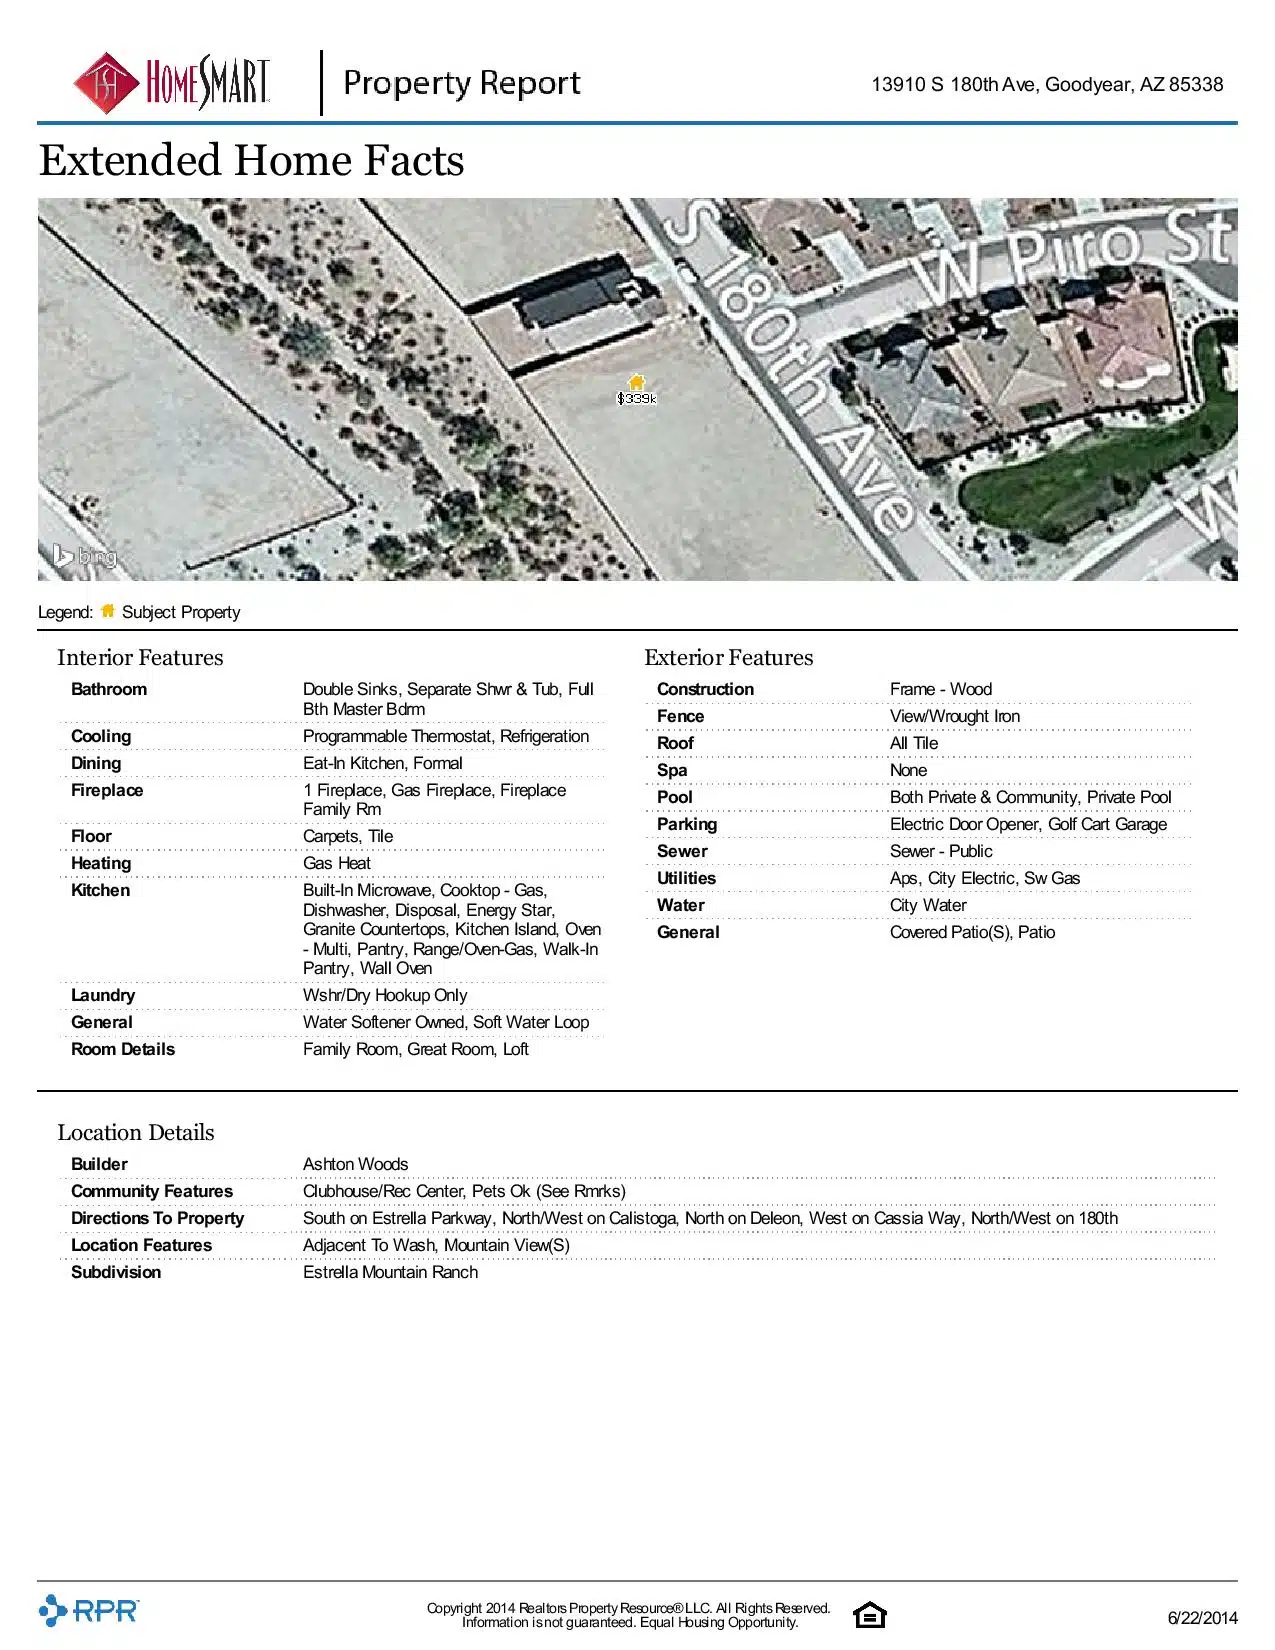 13910-S-180th-Ave-Goodyear-AZ-85338-page-004